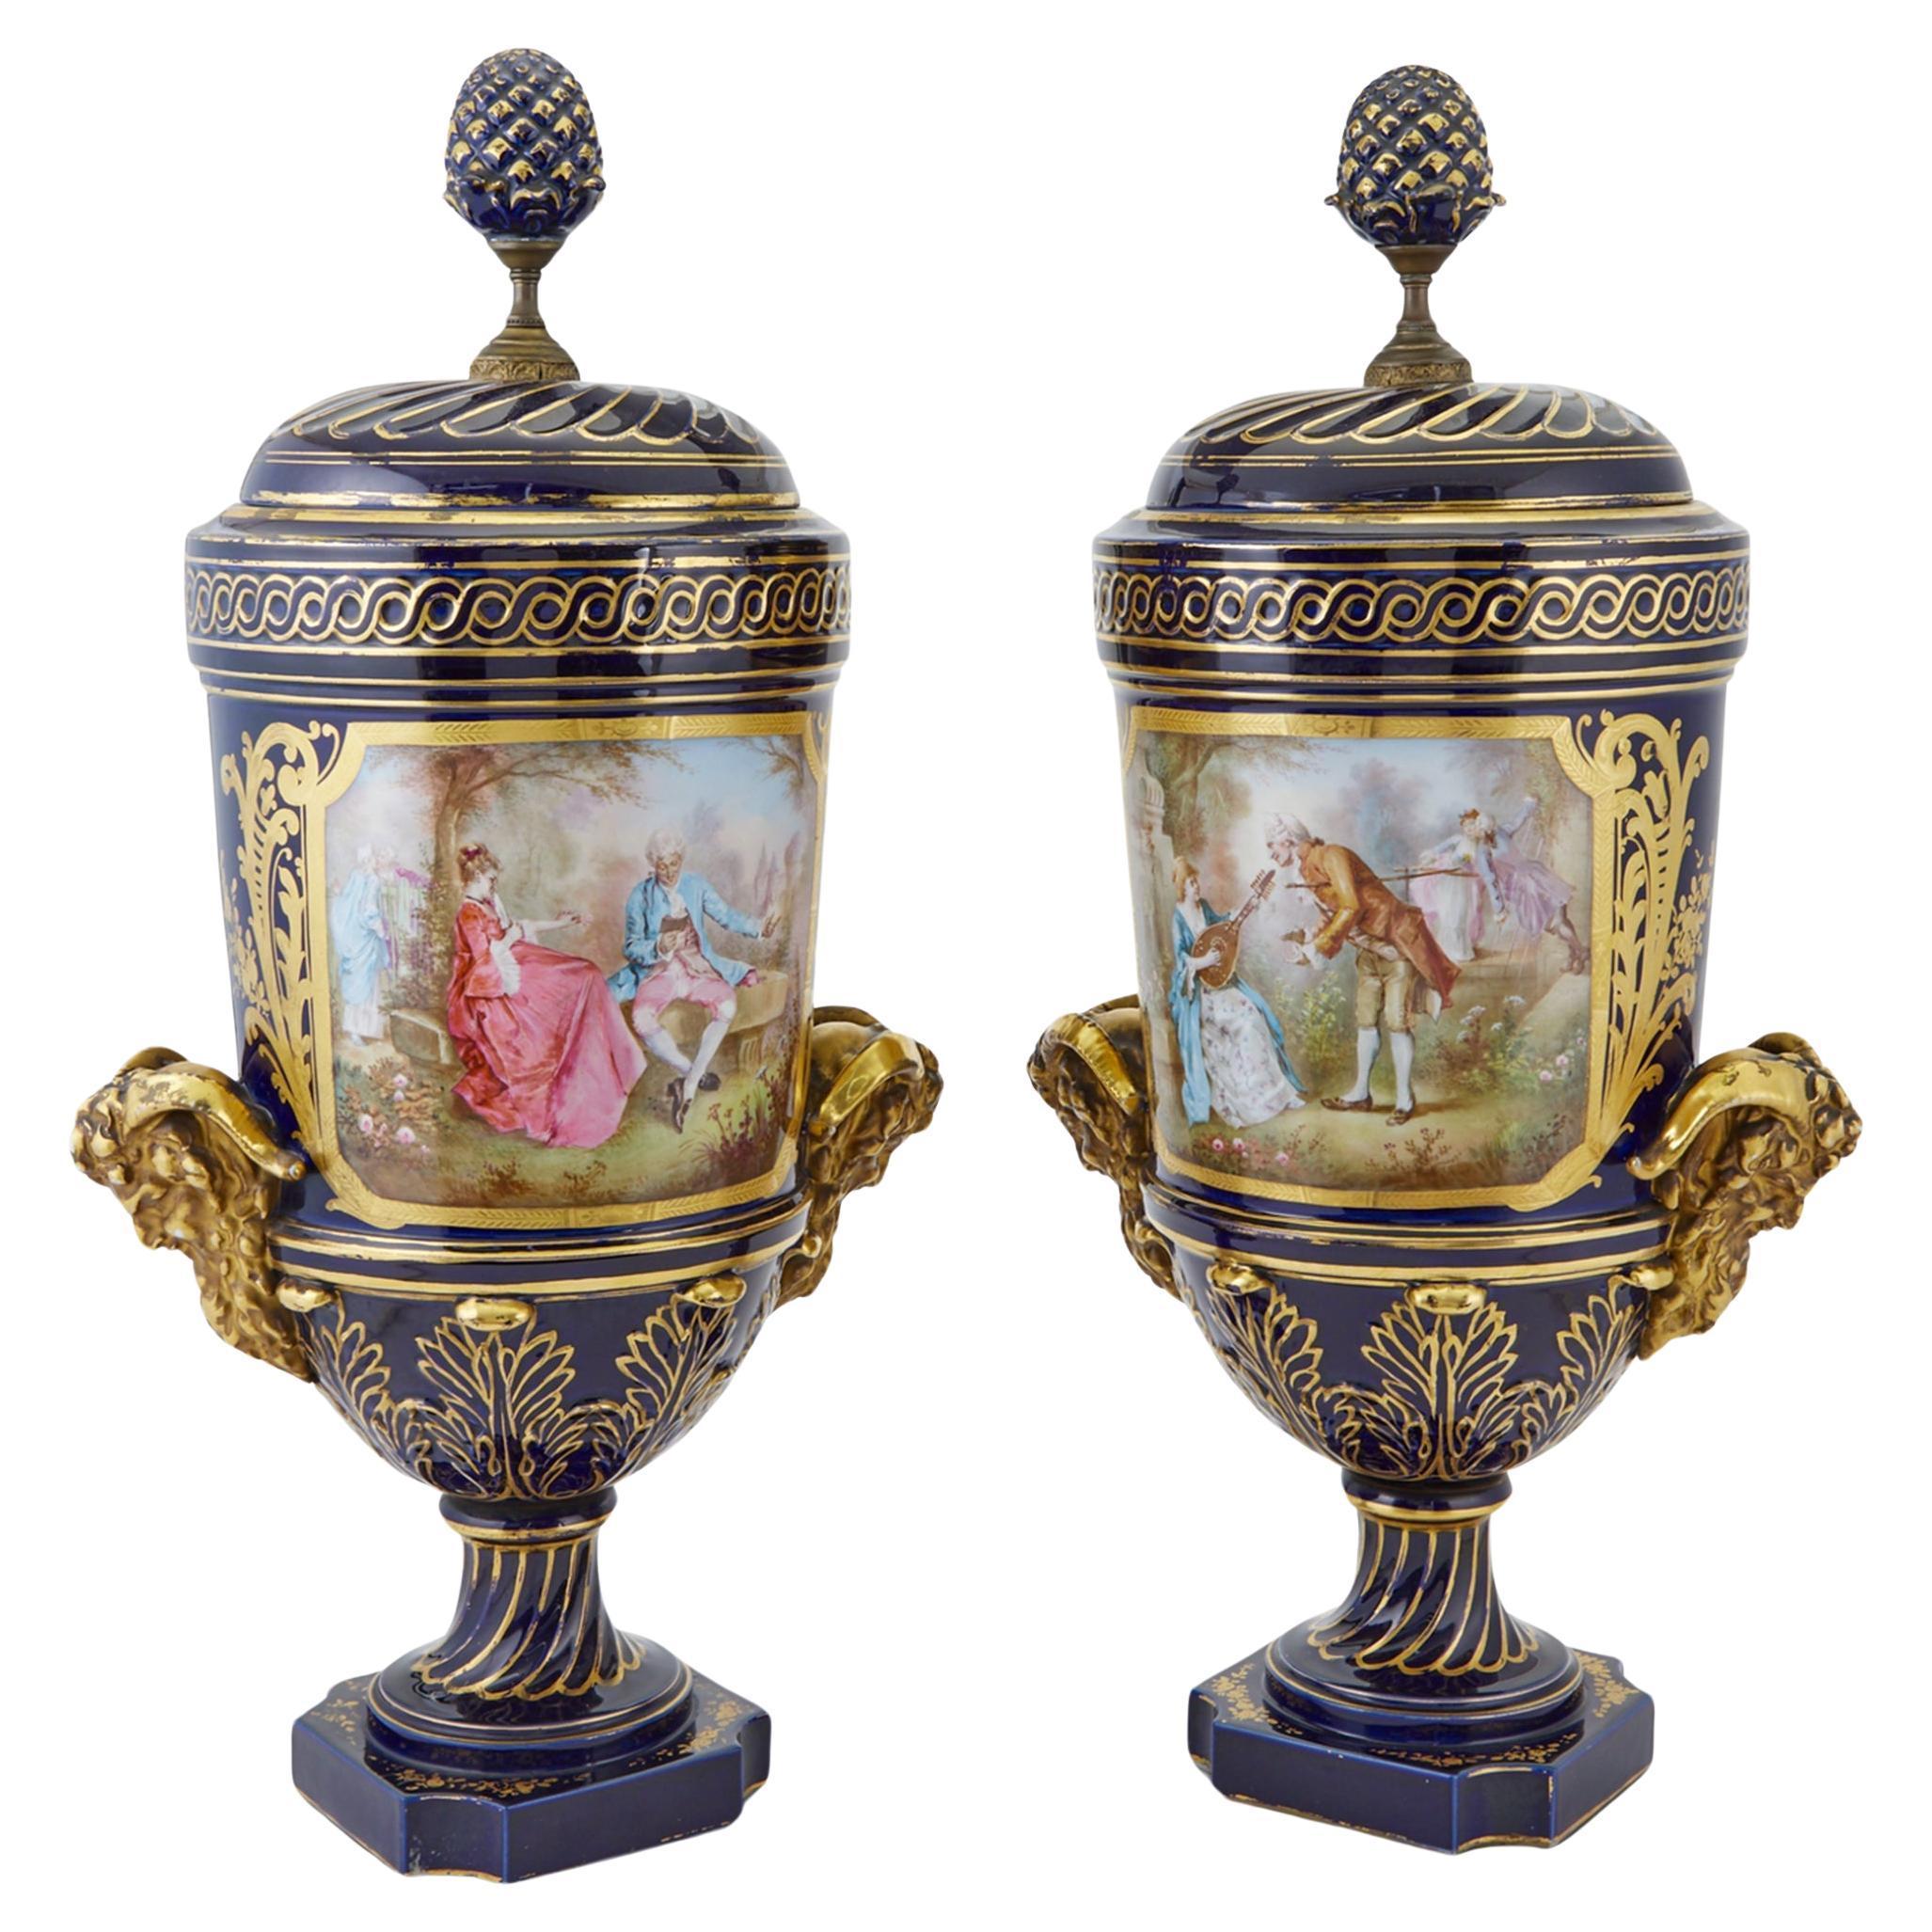 Pair of Sevres Style Gilt and Polychrome Decorated Porcelain Two-Handled Urns For Sale